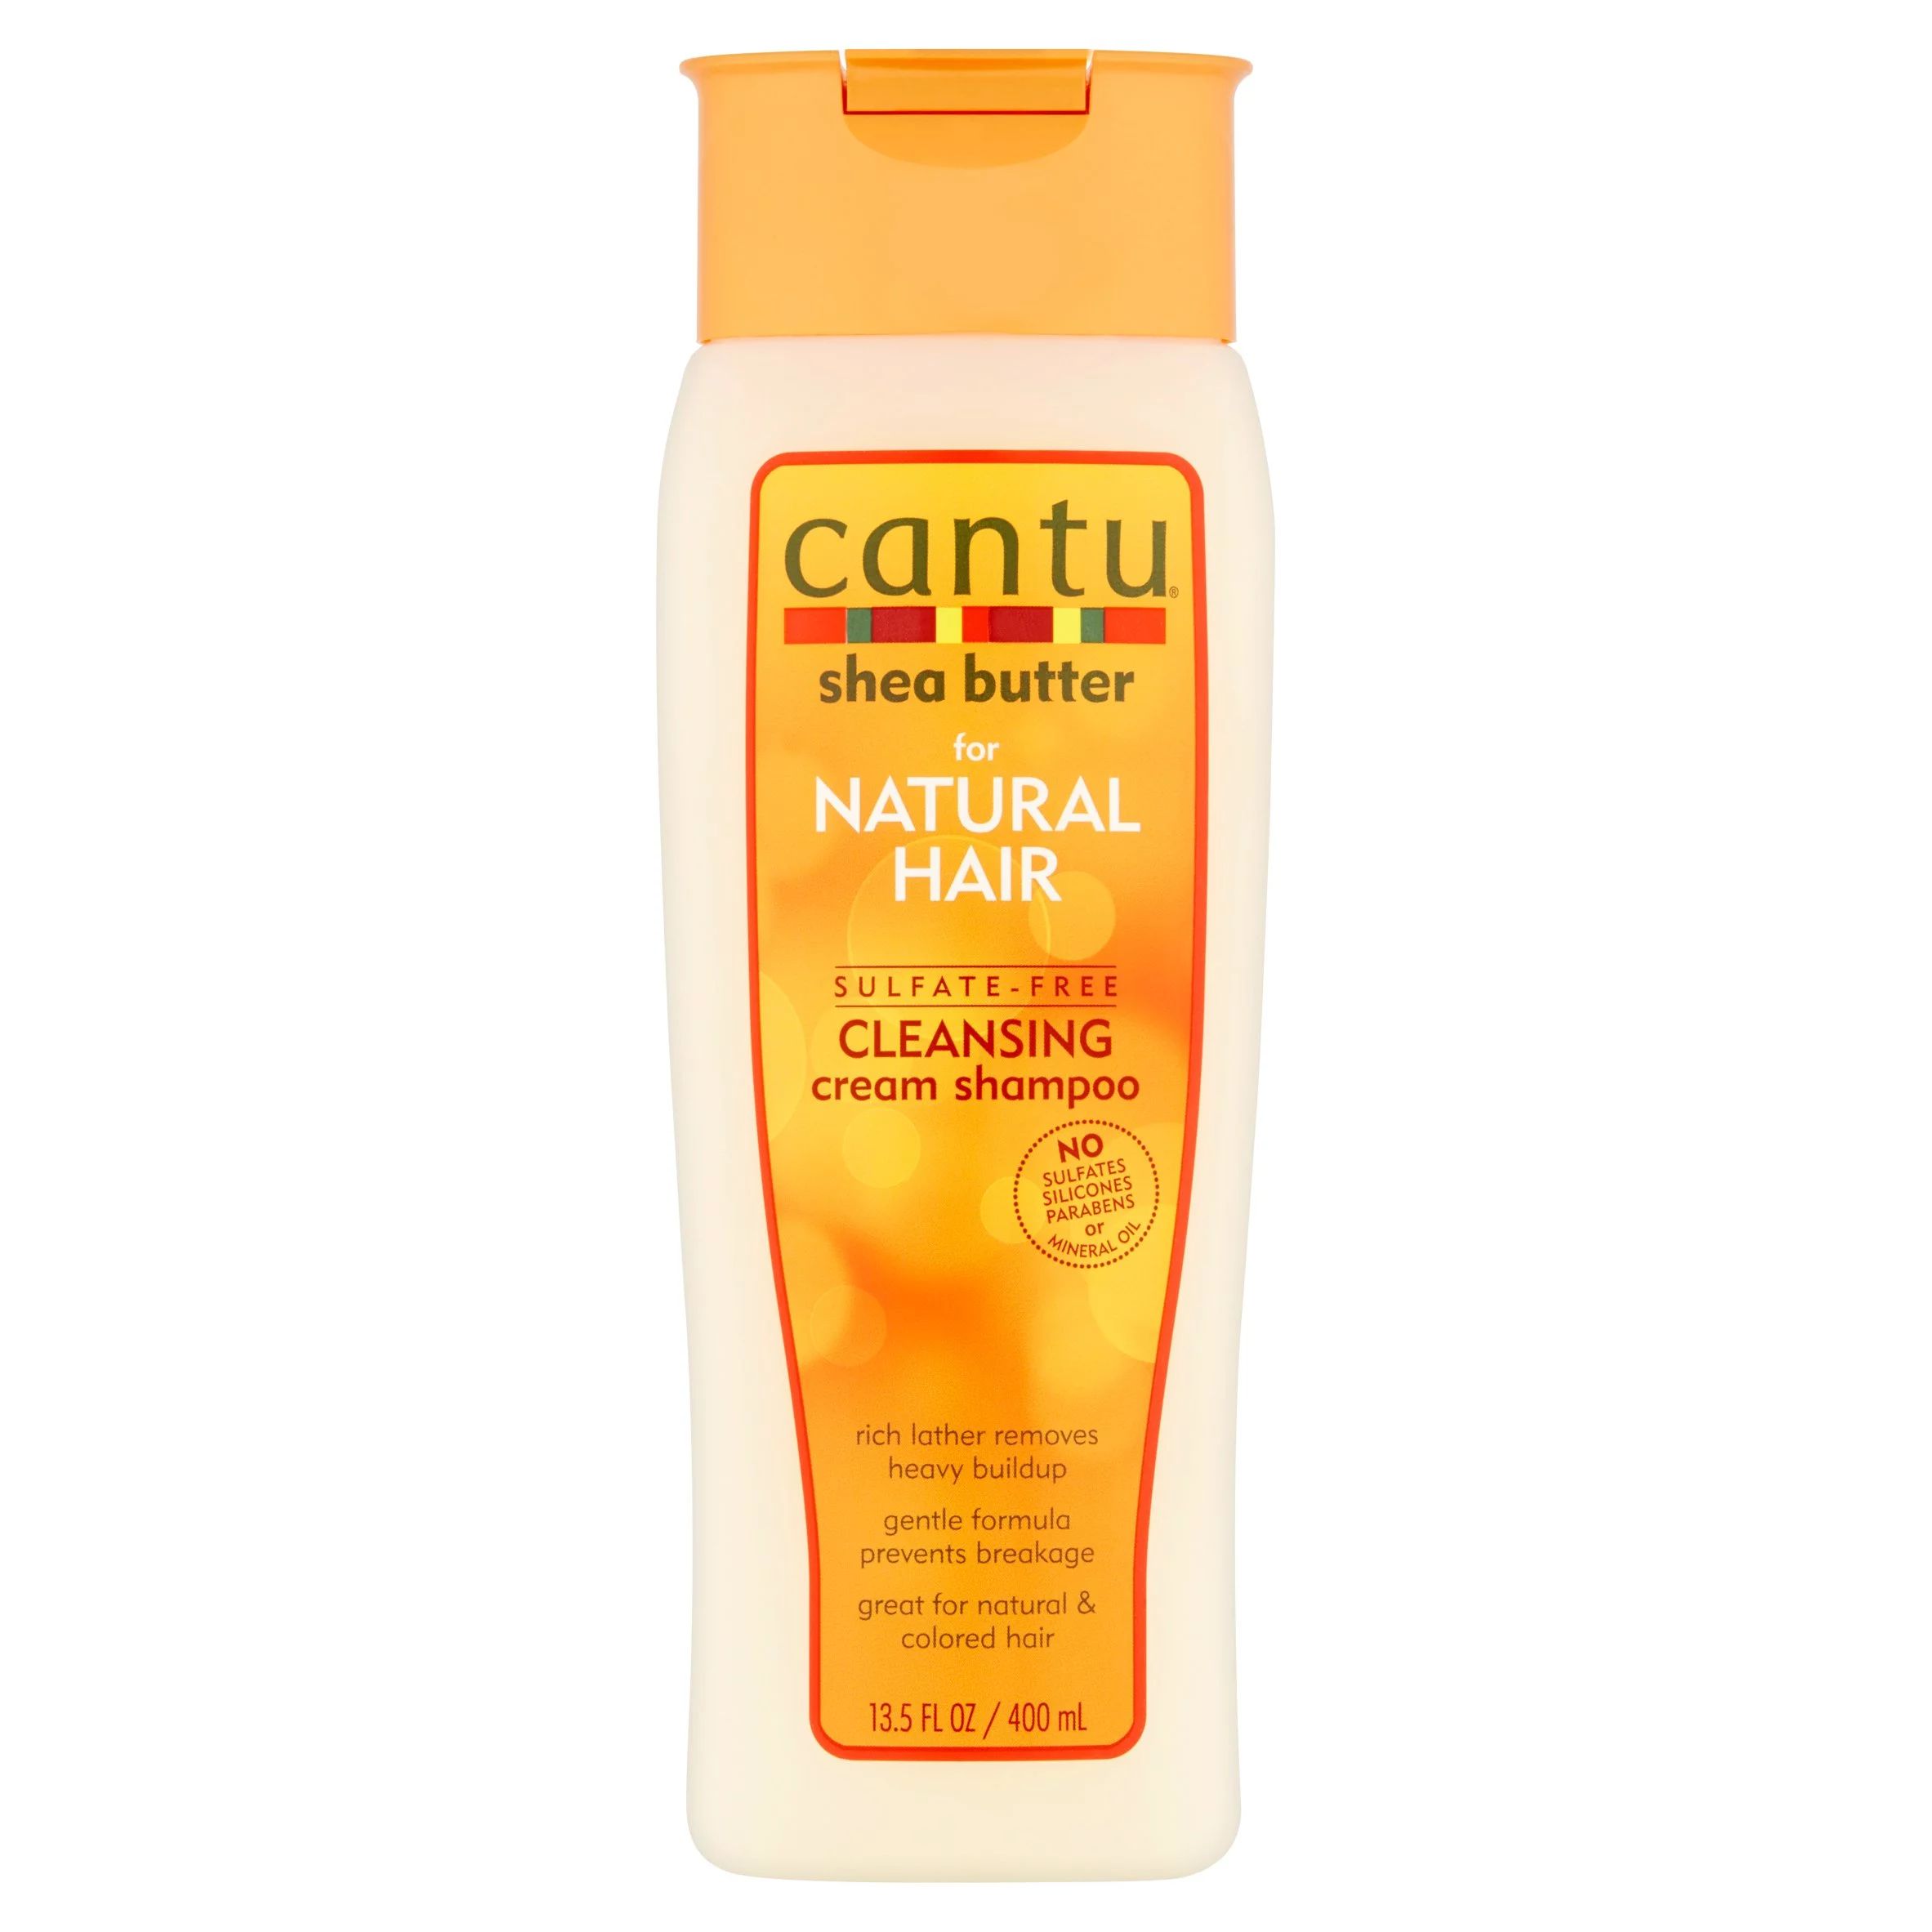 Cantu Shea Butter for Natural Hair Sulfate-Free Cleansing Cream Shampoo, 13.5 oz | Walmart (US)